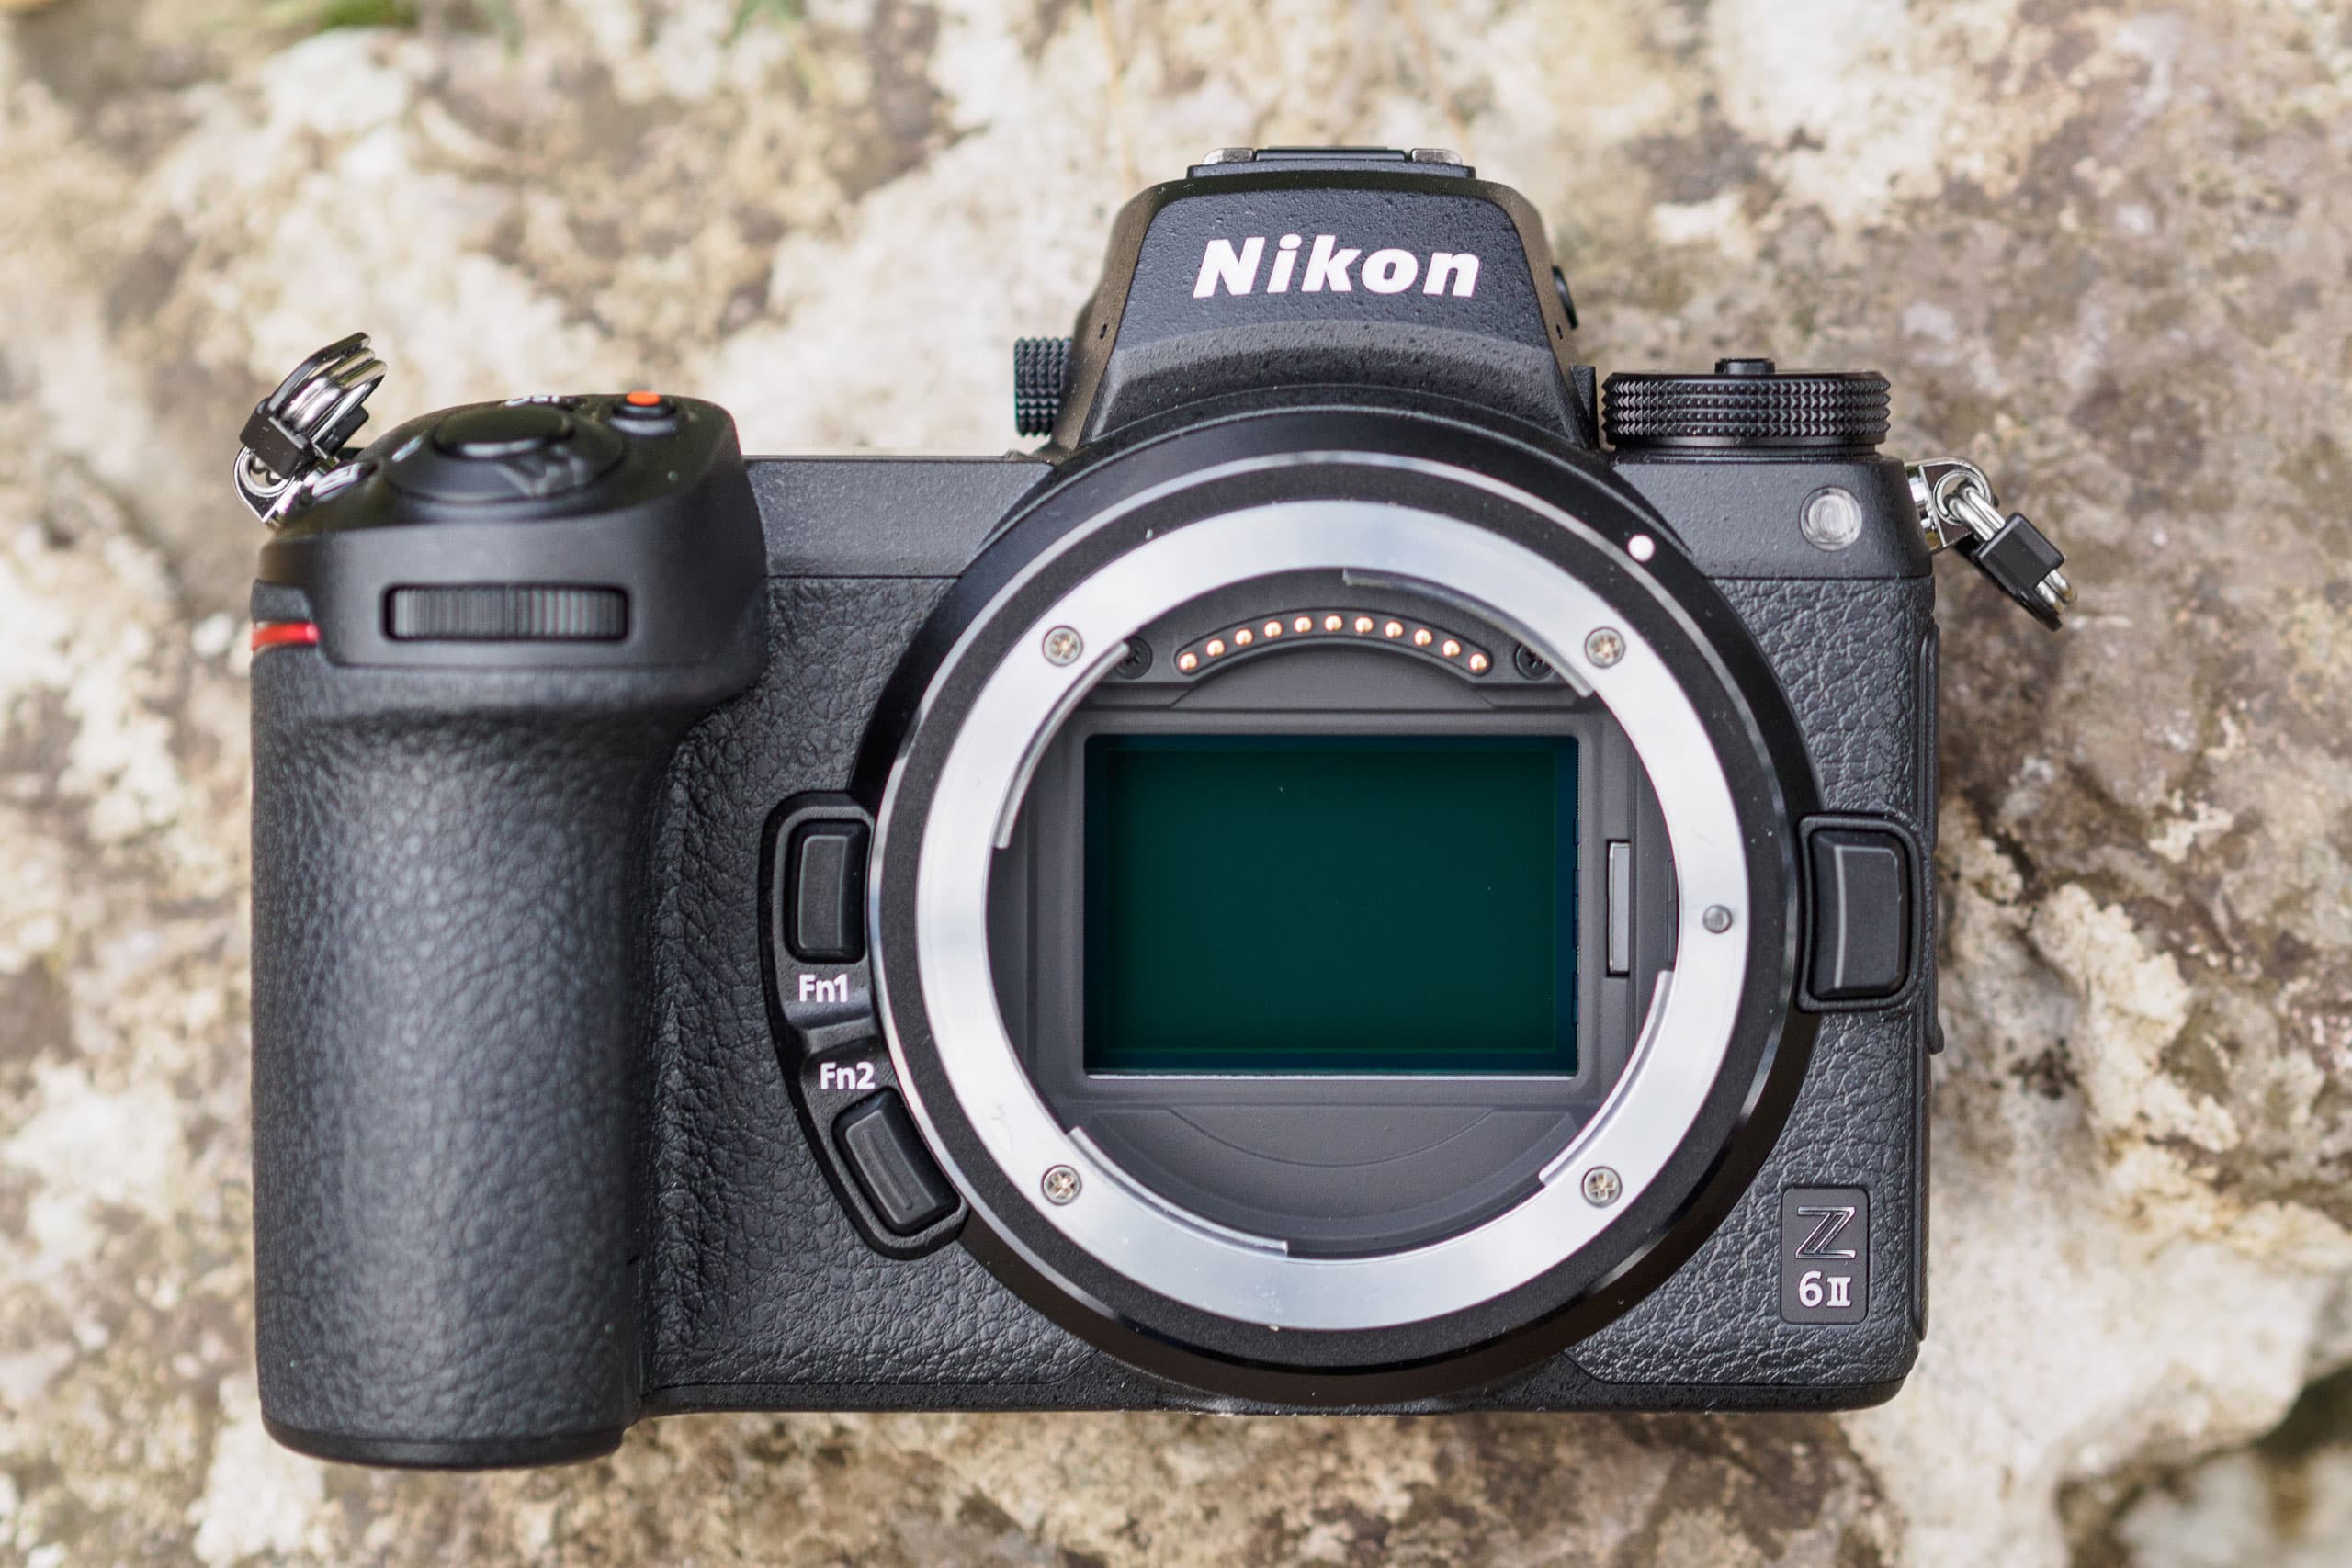 Nikon Z6 II Review, Great Camera Improved?